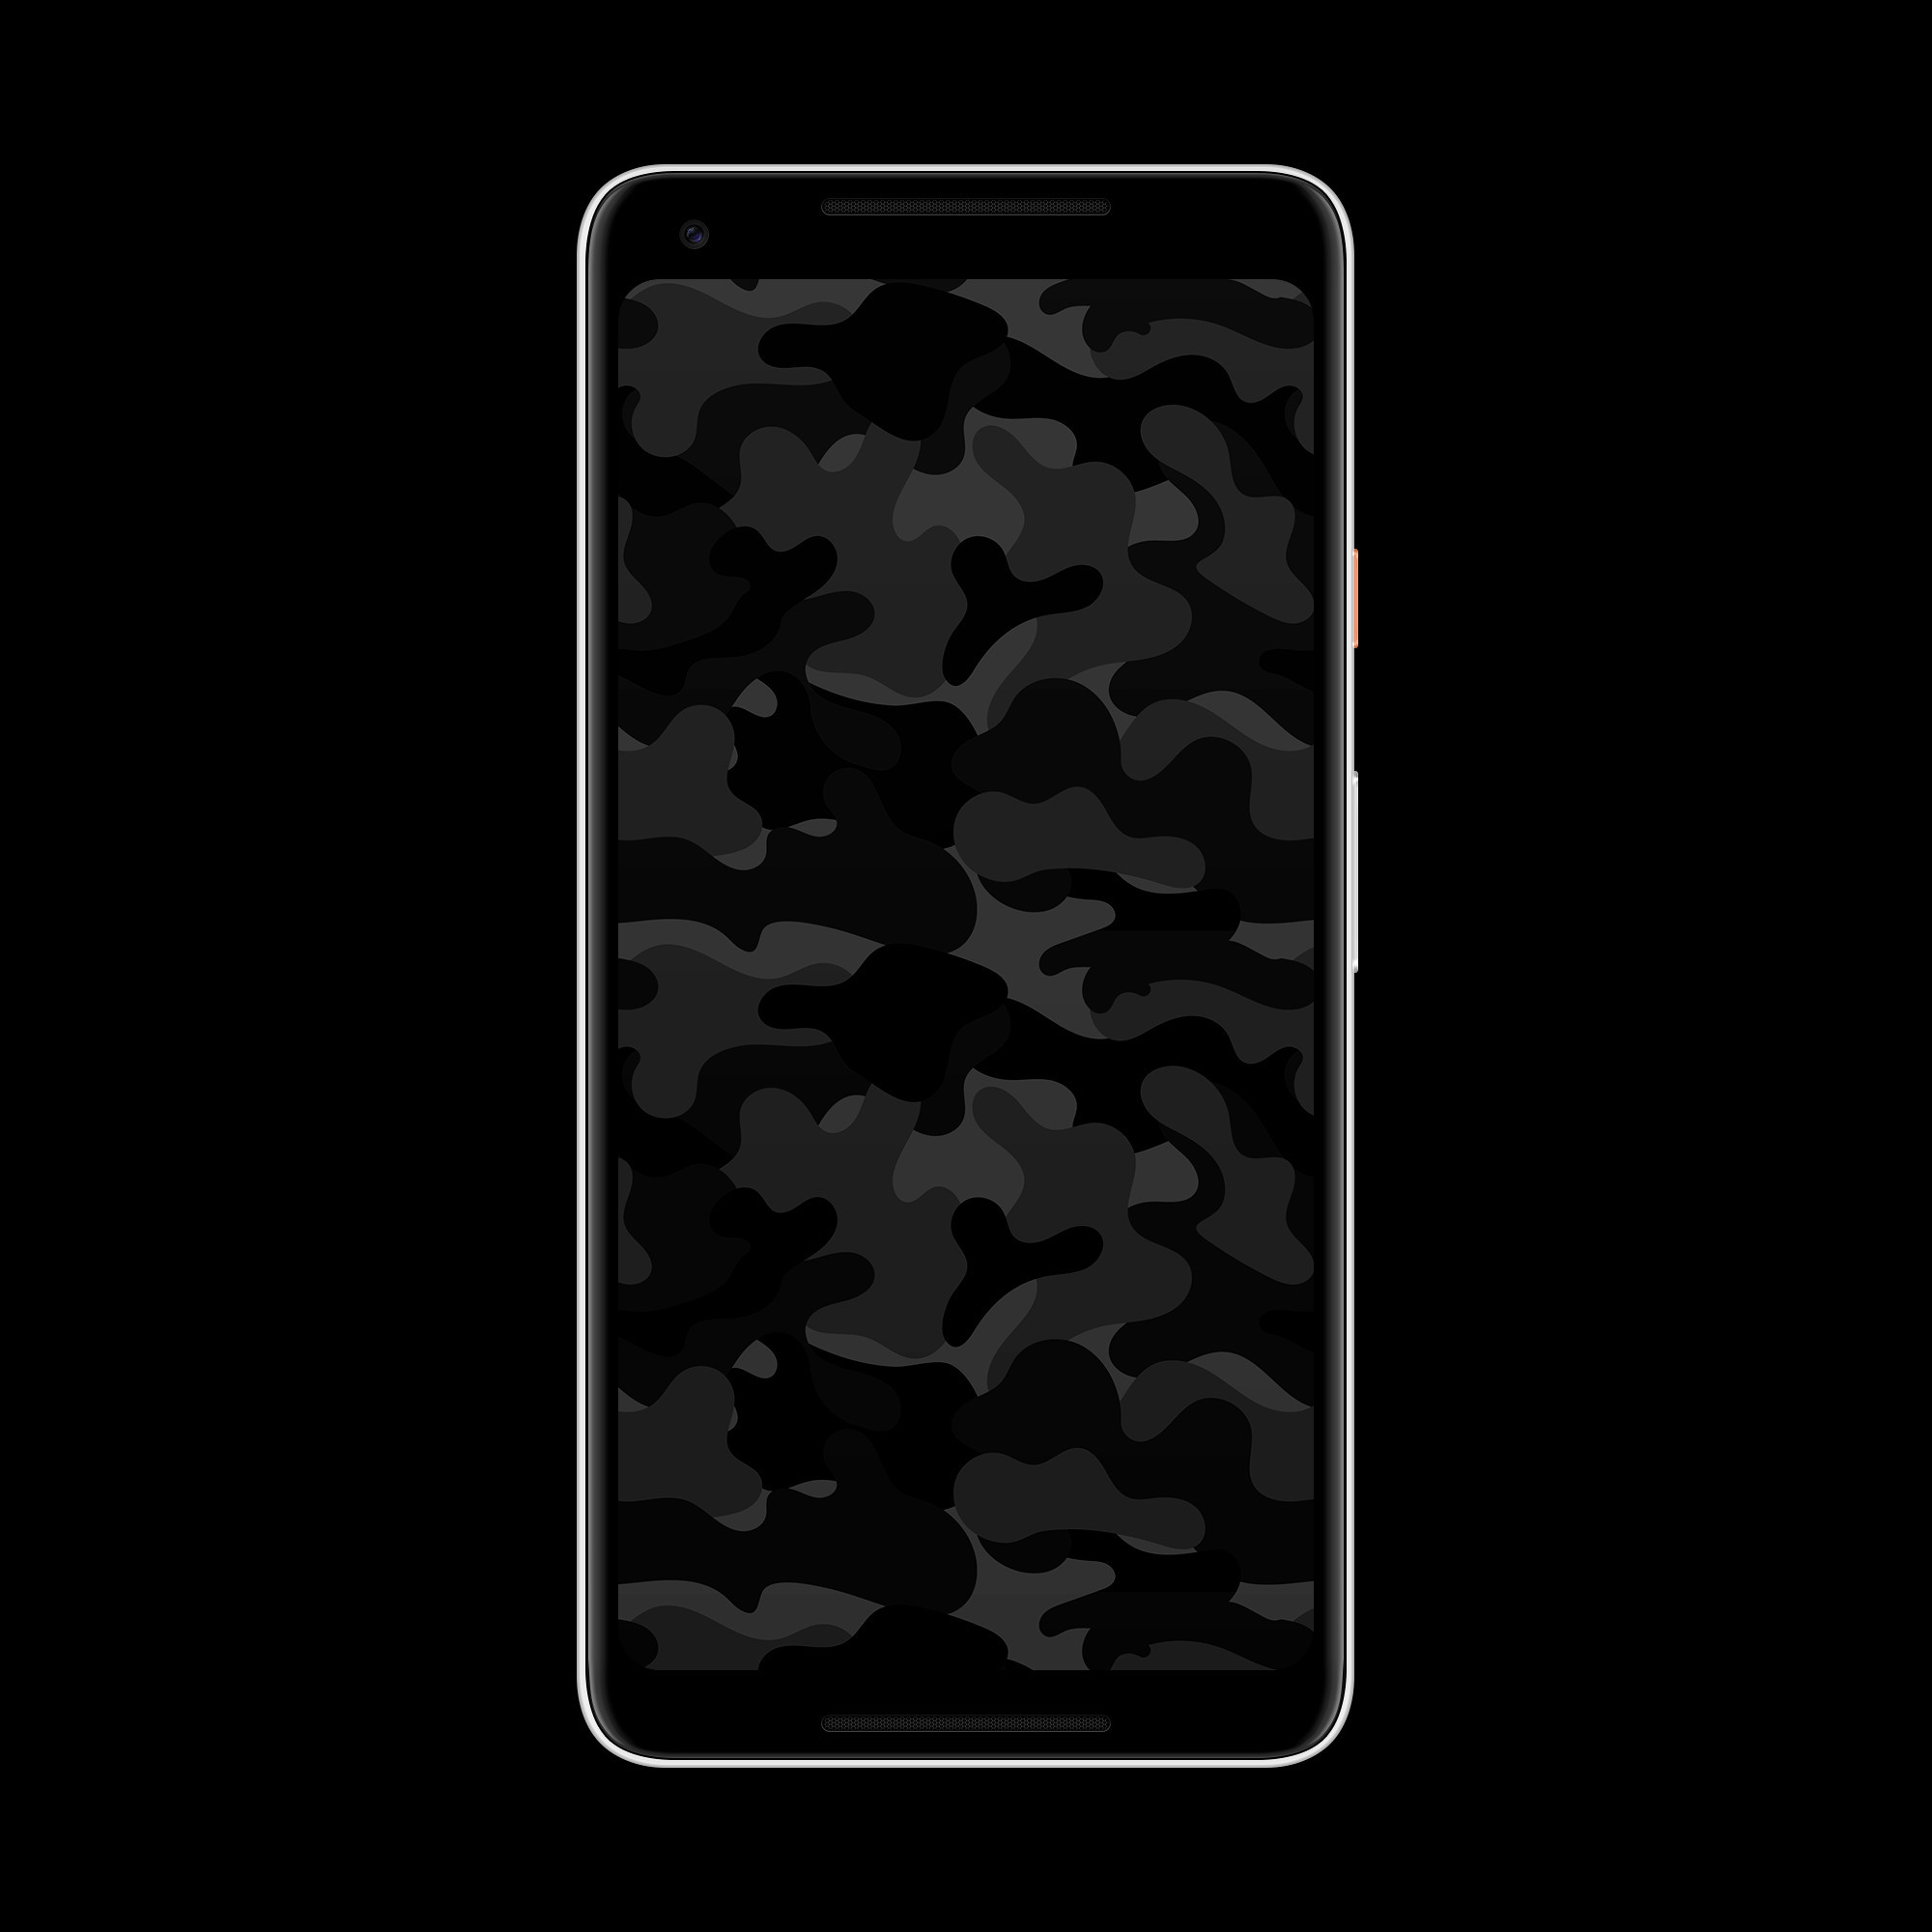 2000x2000 1242x2208 Camouflage : Live HD Camouflage Wallpapers, Photos